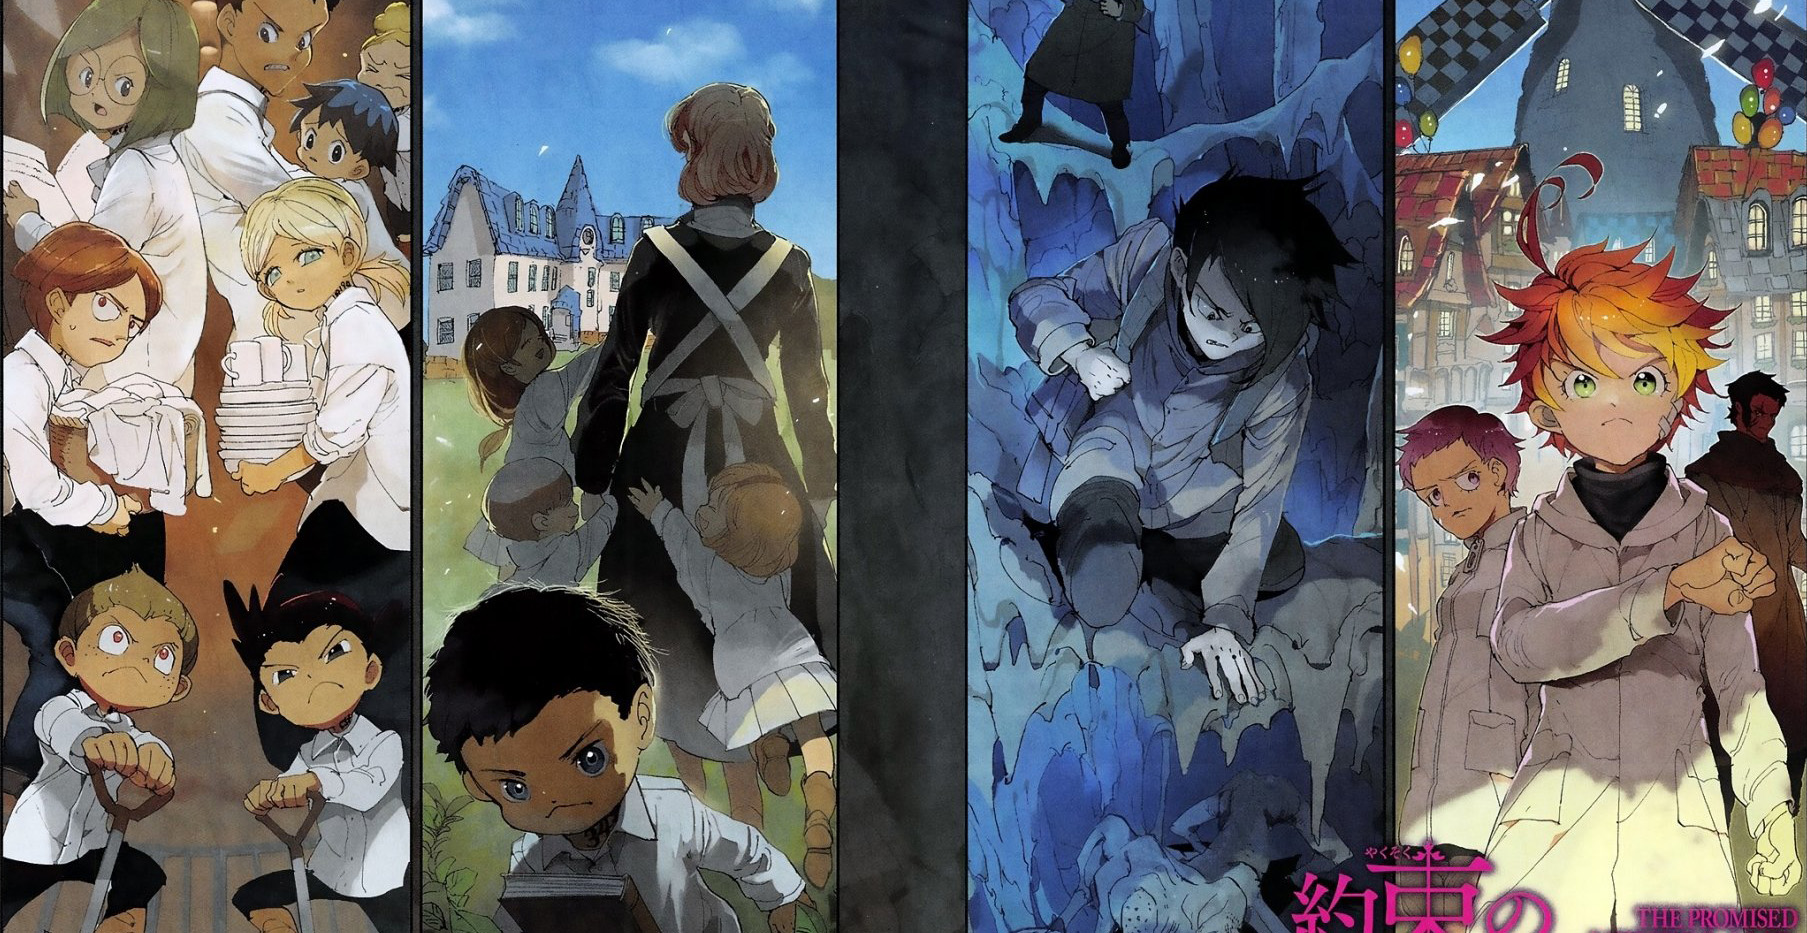 Review Manga] Miền Đất Hứa (The Promised Neverland) 